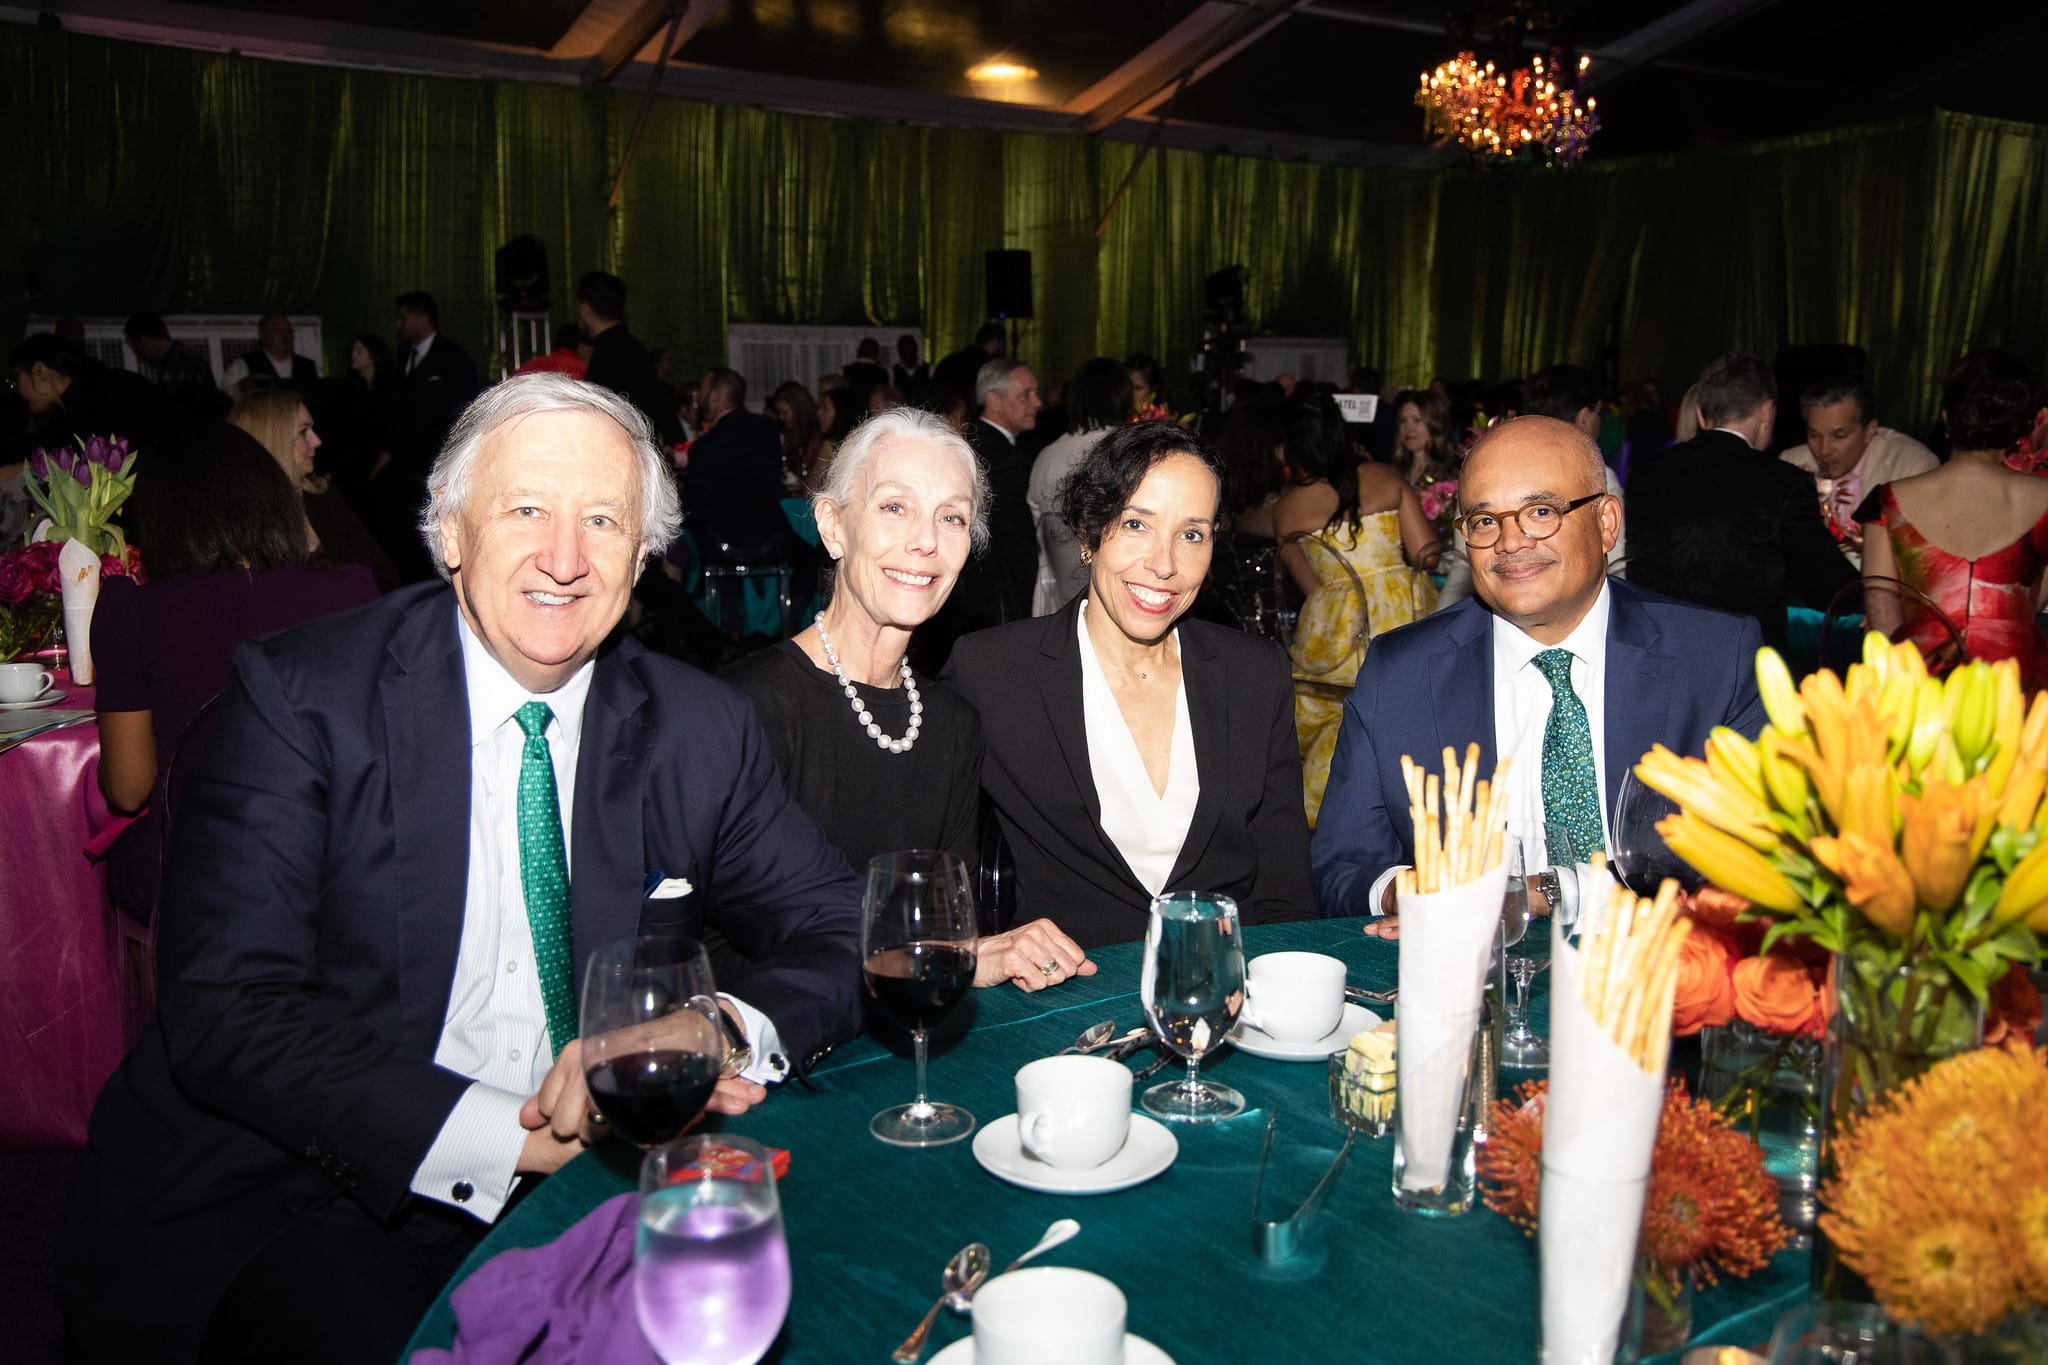 From L-R: Mark Evans, Linda Evans, Lisa Wallace, Barron Wallace Gala on the Green® at Discovery Green in downtown Houston. February 23, 2023. Photo: Lawrence Elizabeth Knox